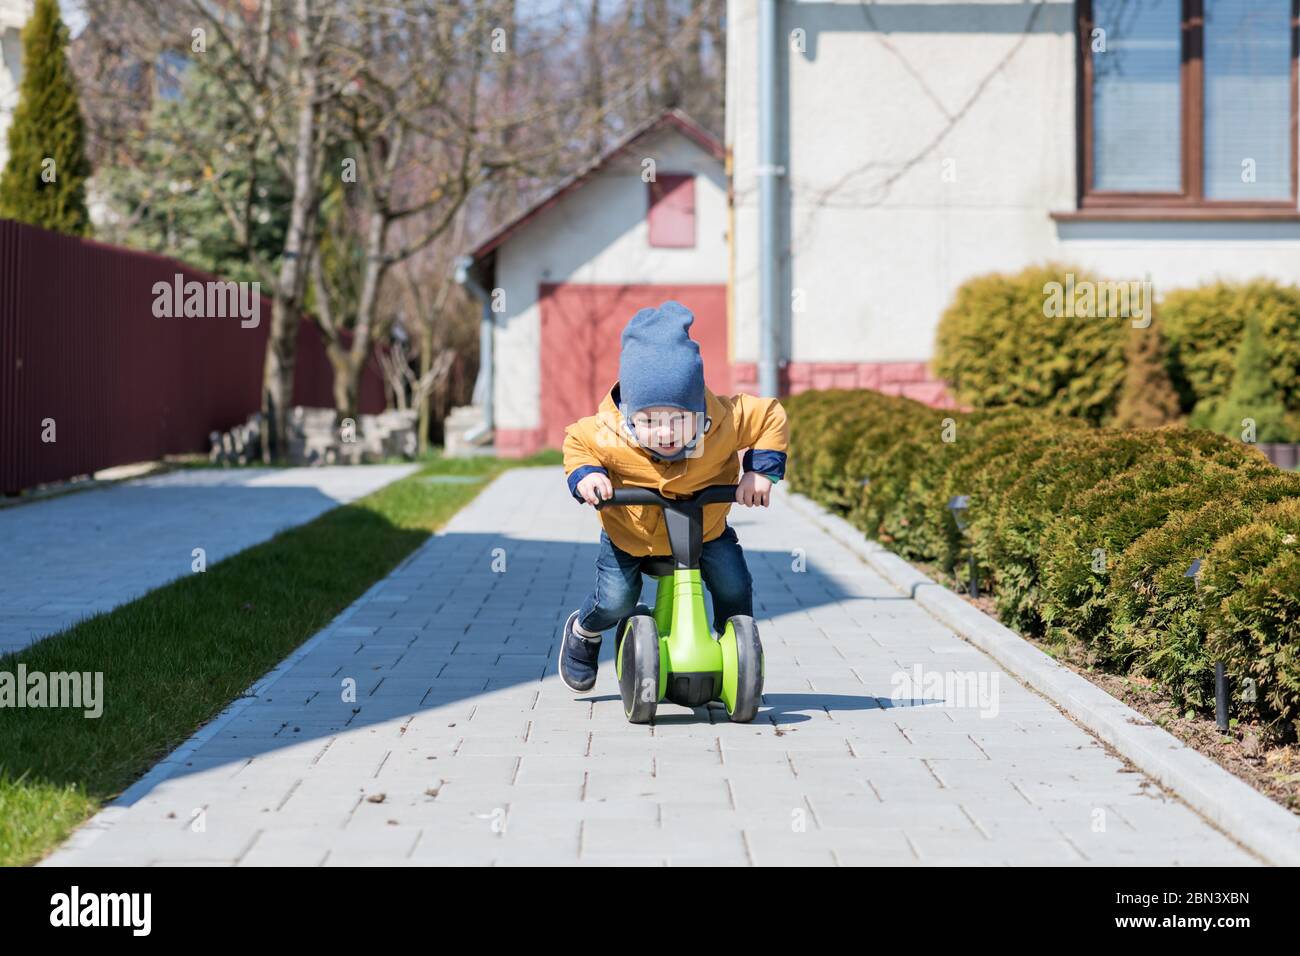 Little boy on his bike on paving path near his house. Happy childhood concept Stock Photo